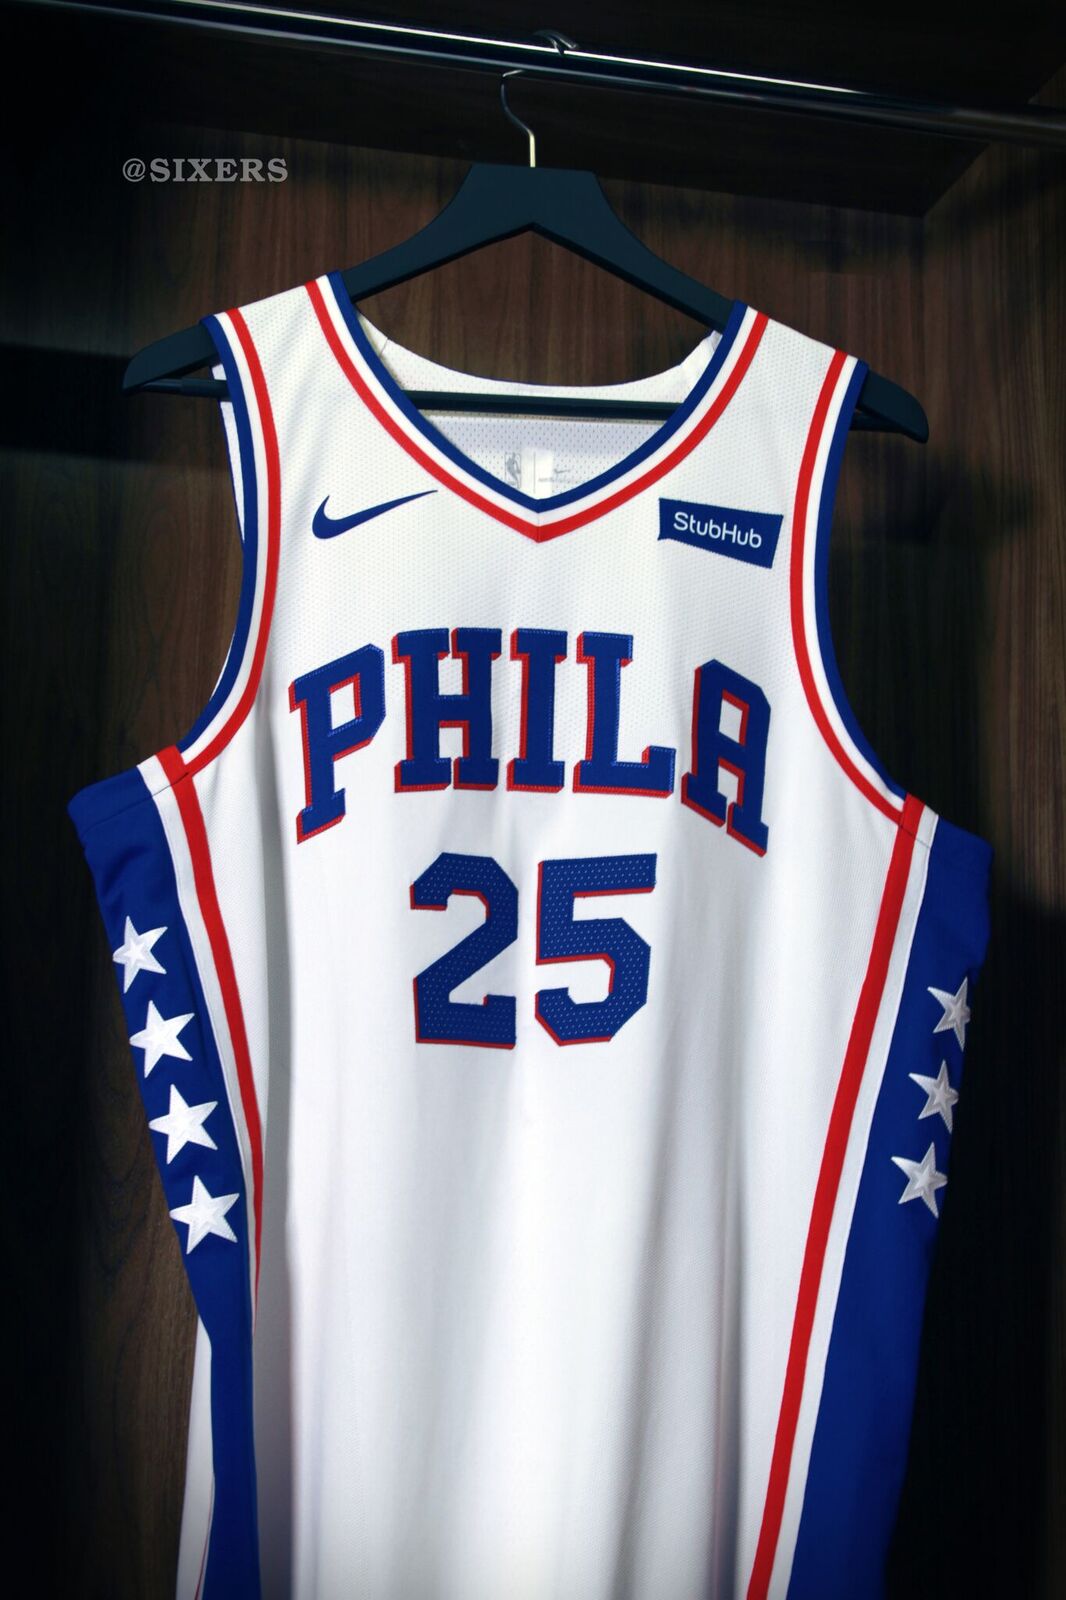 sixers jersey with stubhub patch